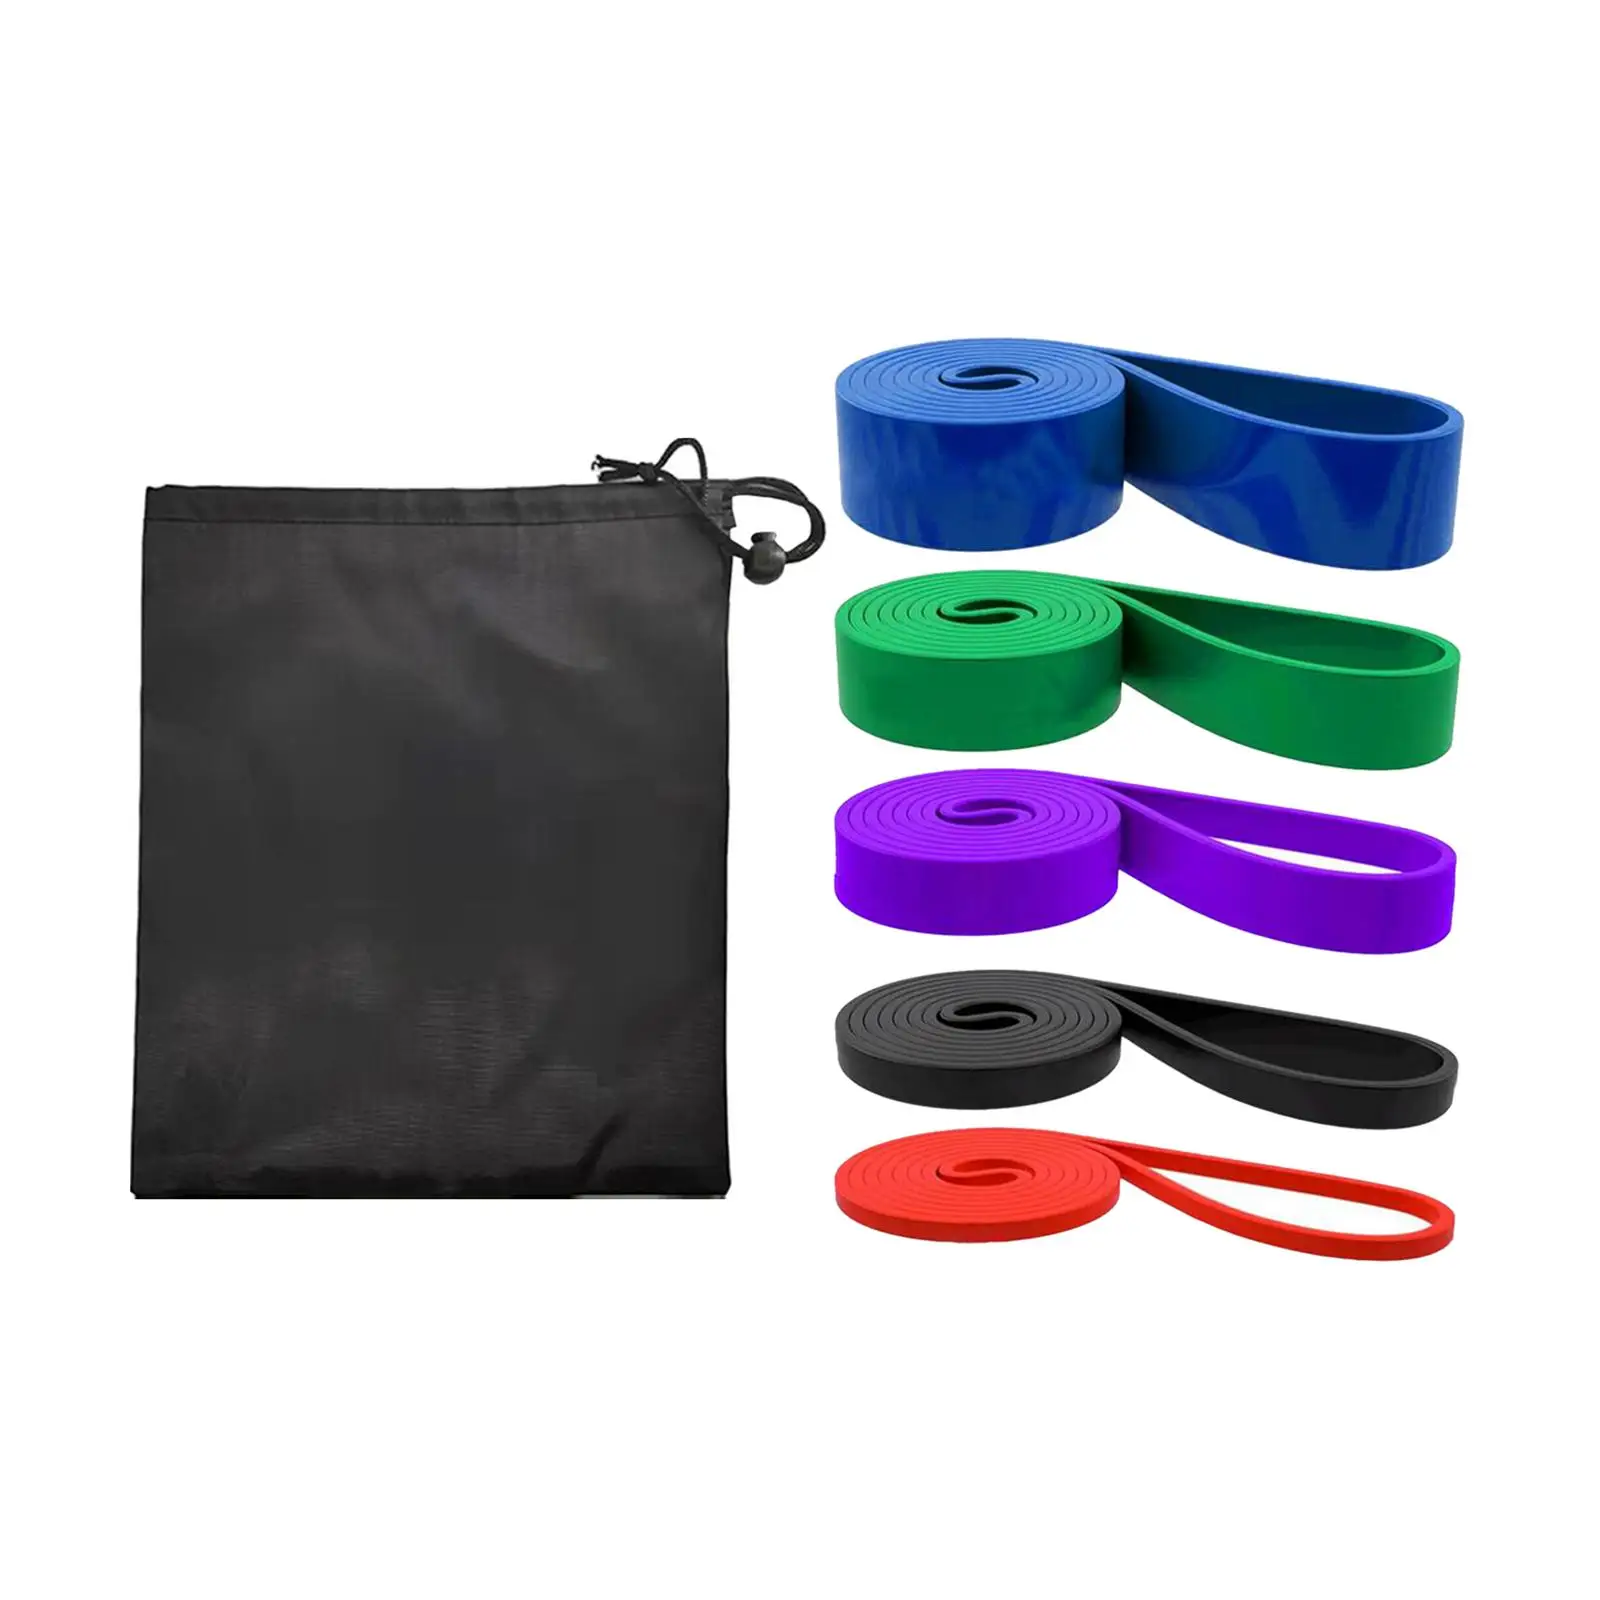 Resistance Bands Strength Training Pull up Assist Bands with Storage Bag Men Women Exercise Bands Workout Bands for Working Out